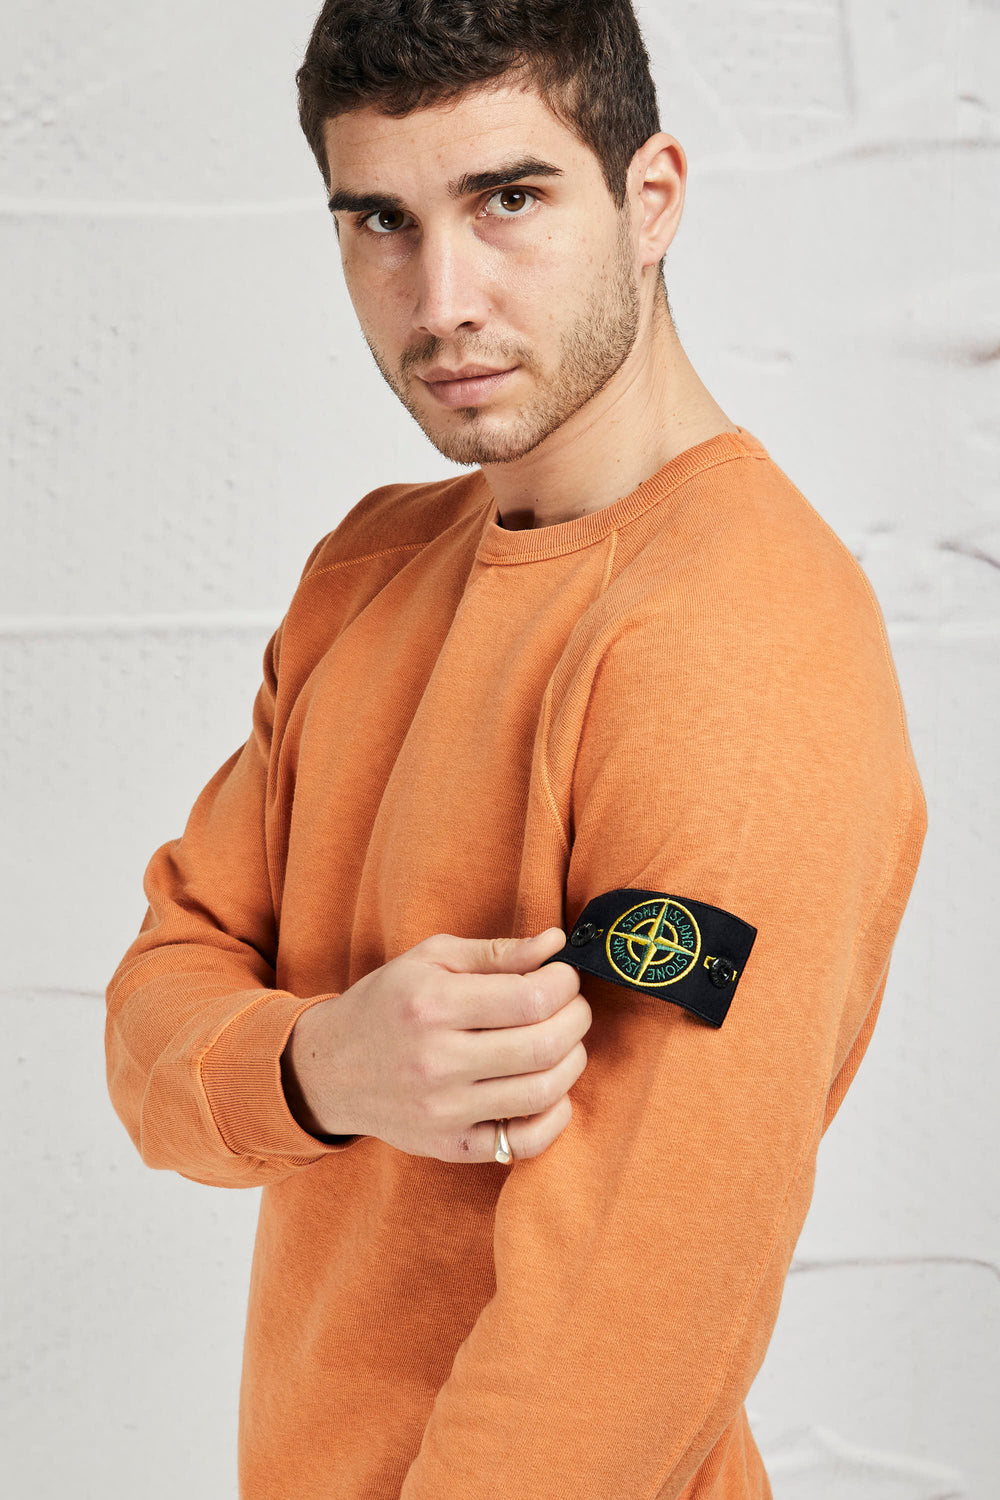 Stone Island Spring Summer 2023 Collection: Explore Innovation